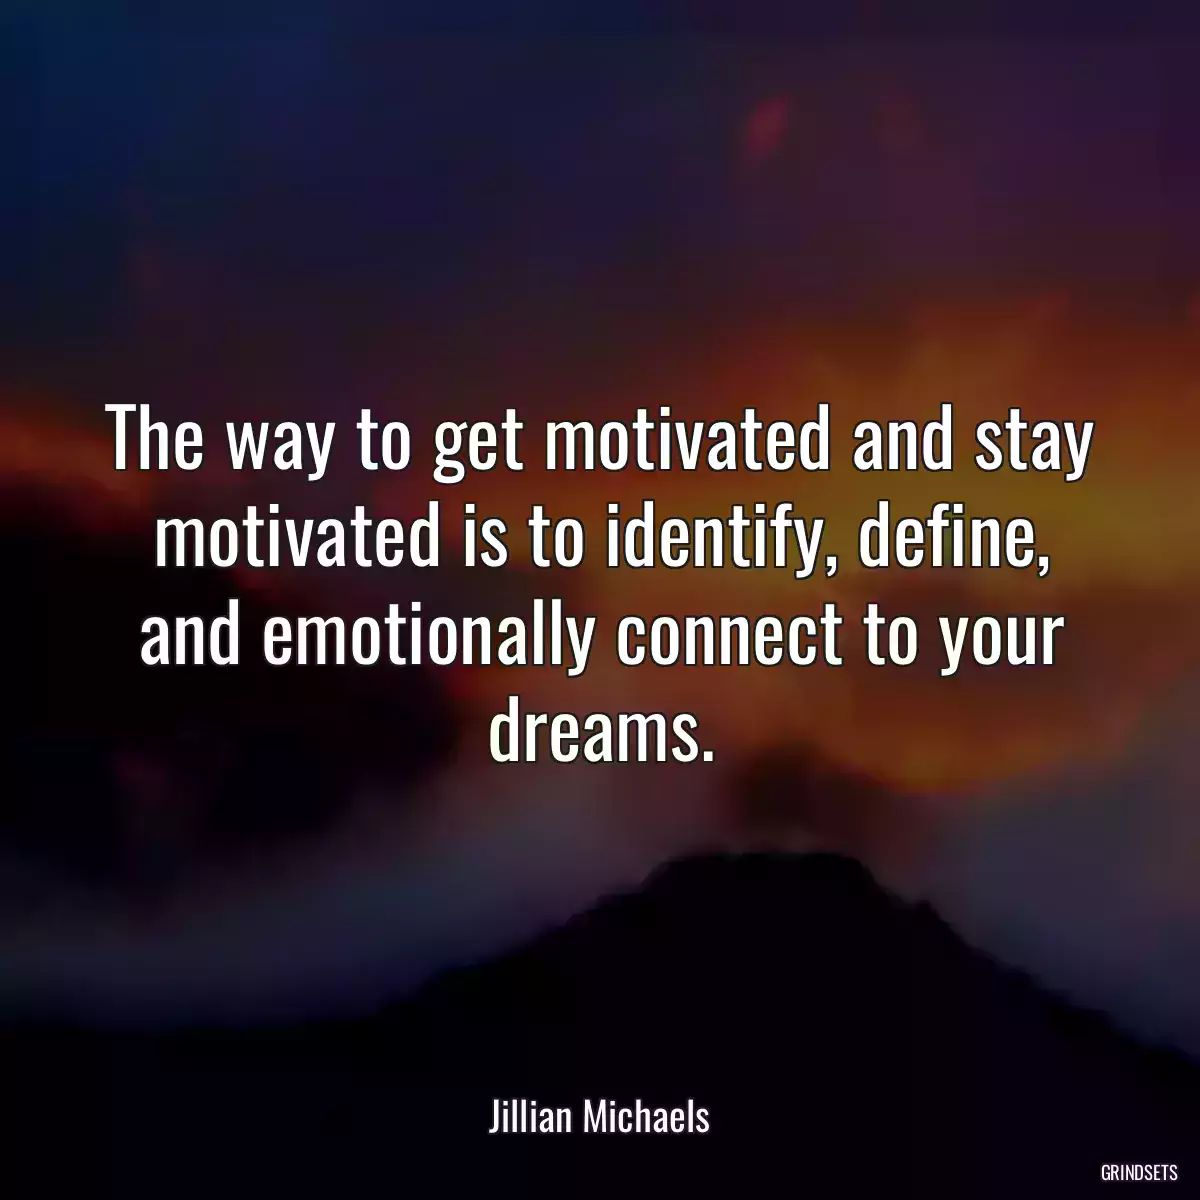 The way to get motivated and stay motivated is to identify, define, and emotionally connect to your dreams.